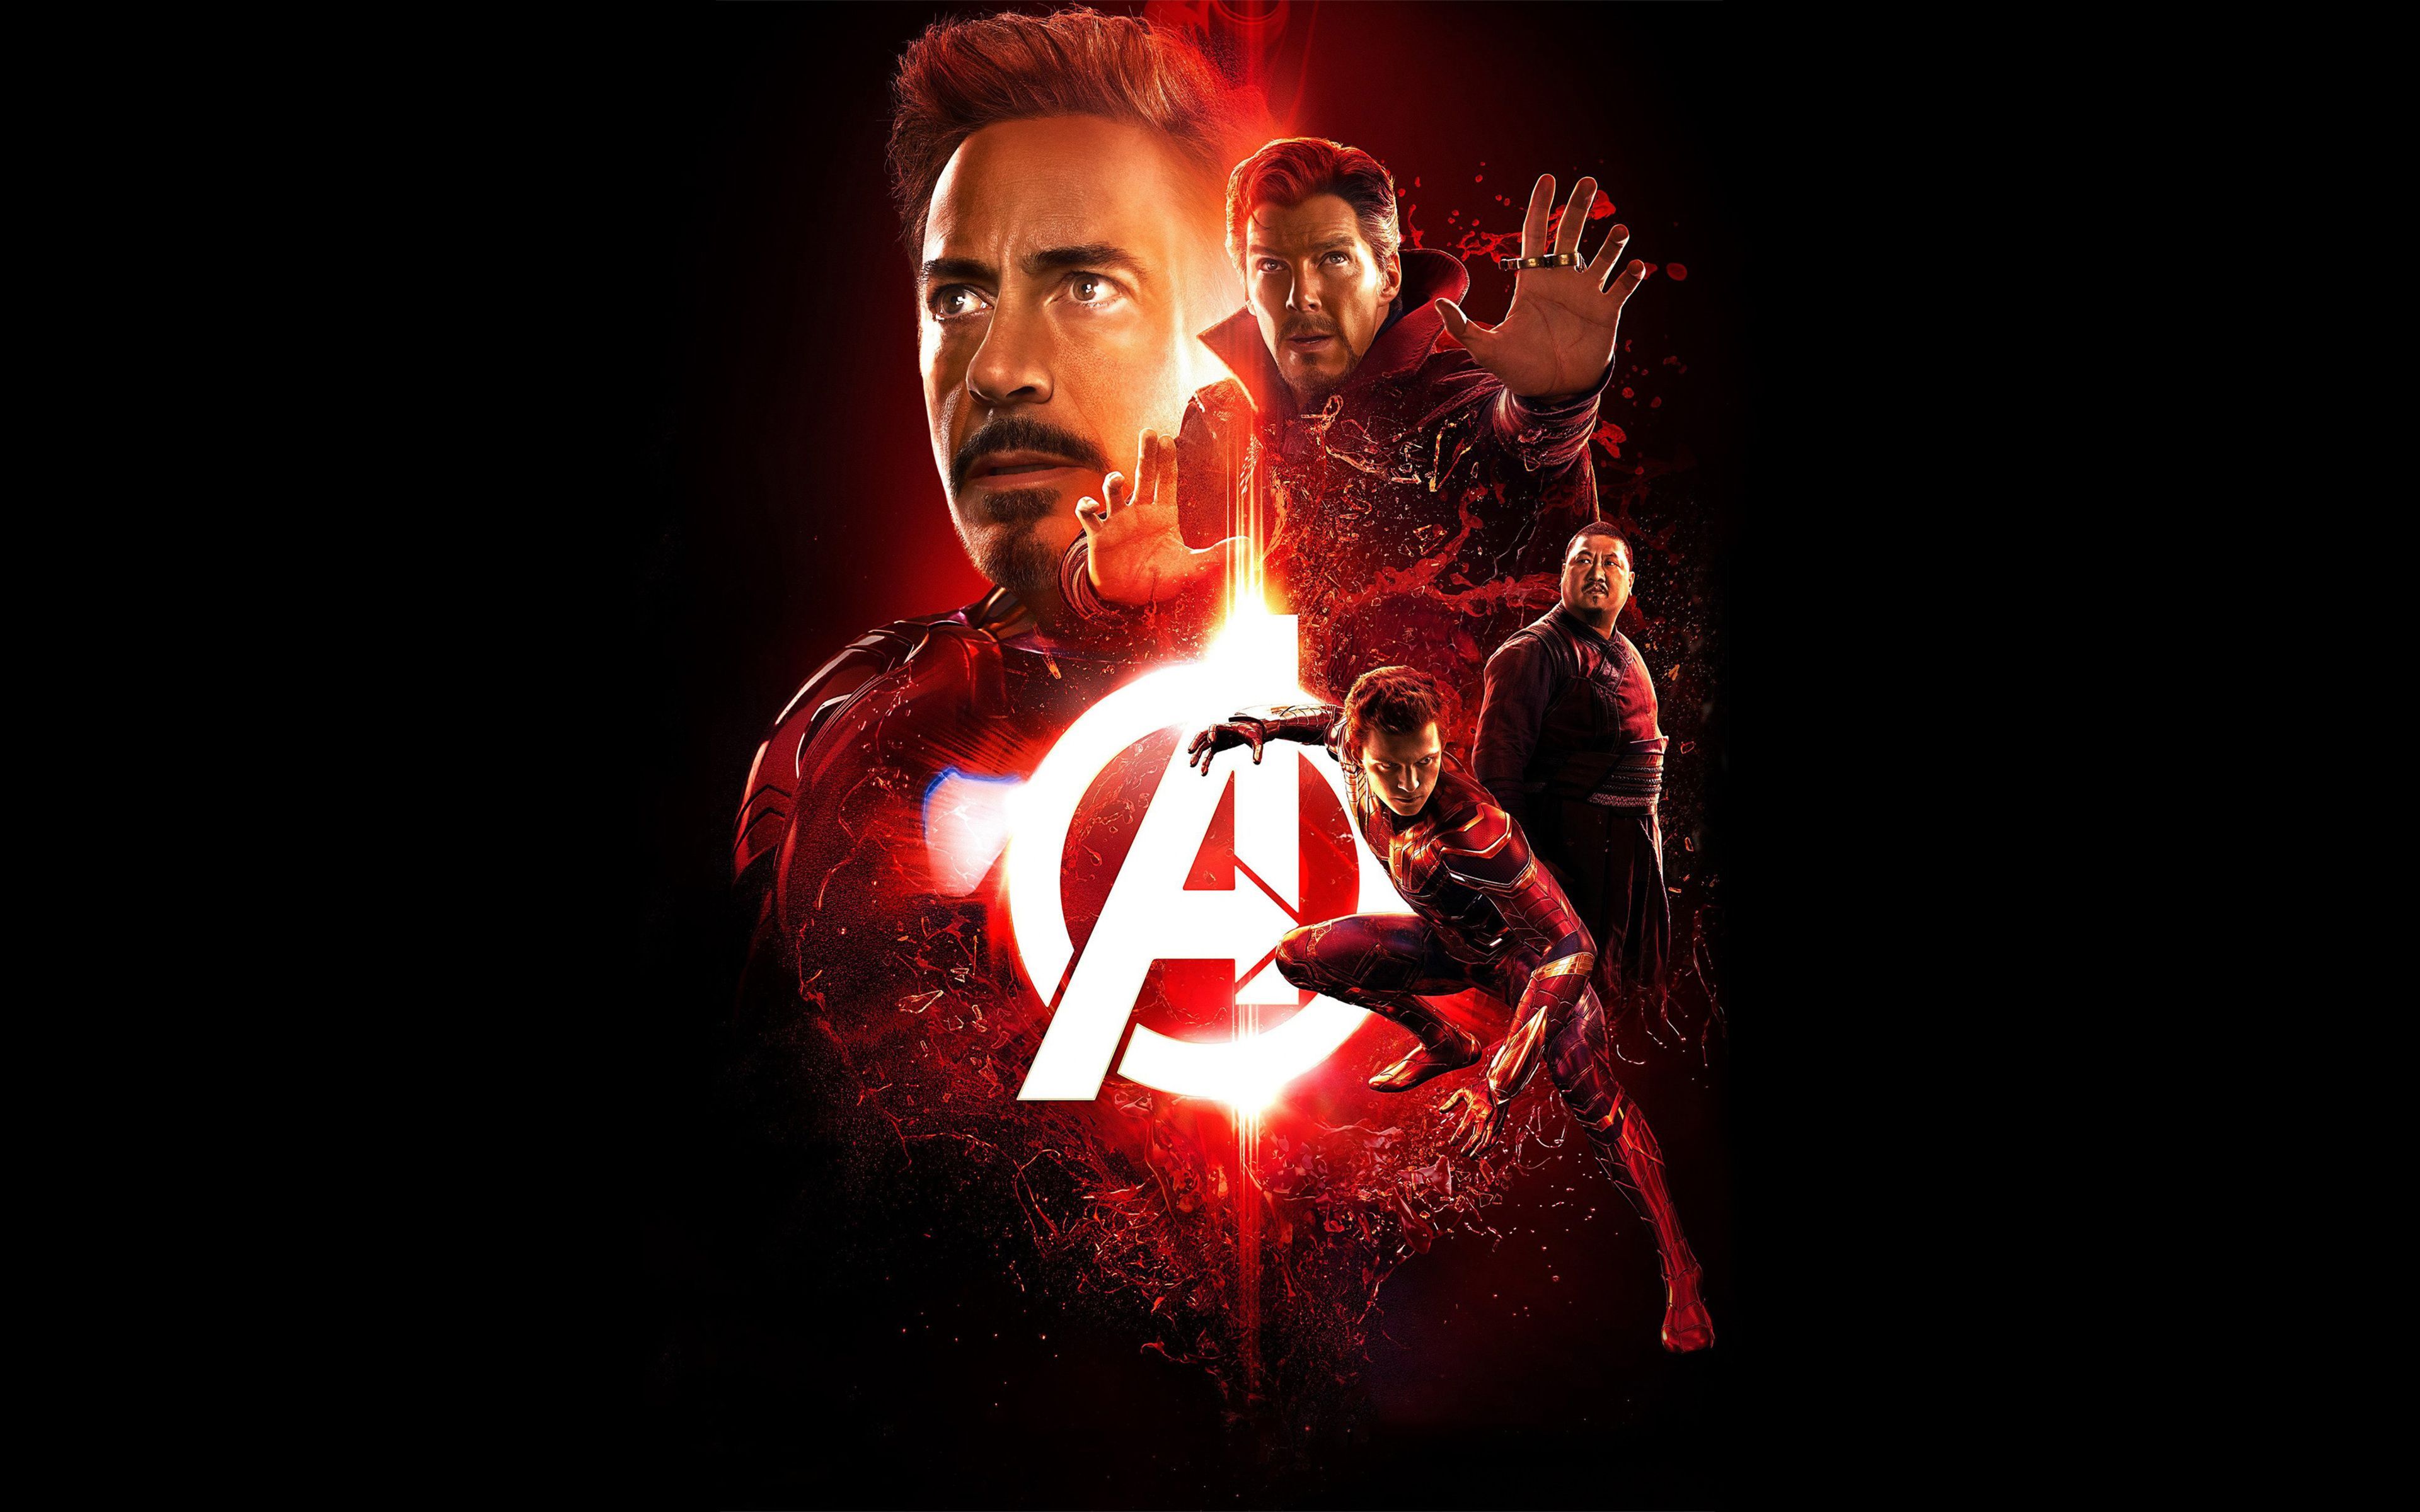 Avengers Infinity War 2018 Reality Stone Poster 4k In 3840x2400 Resolution